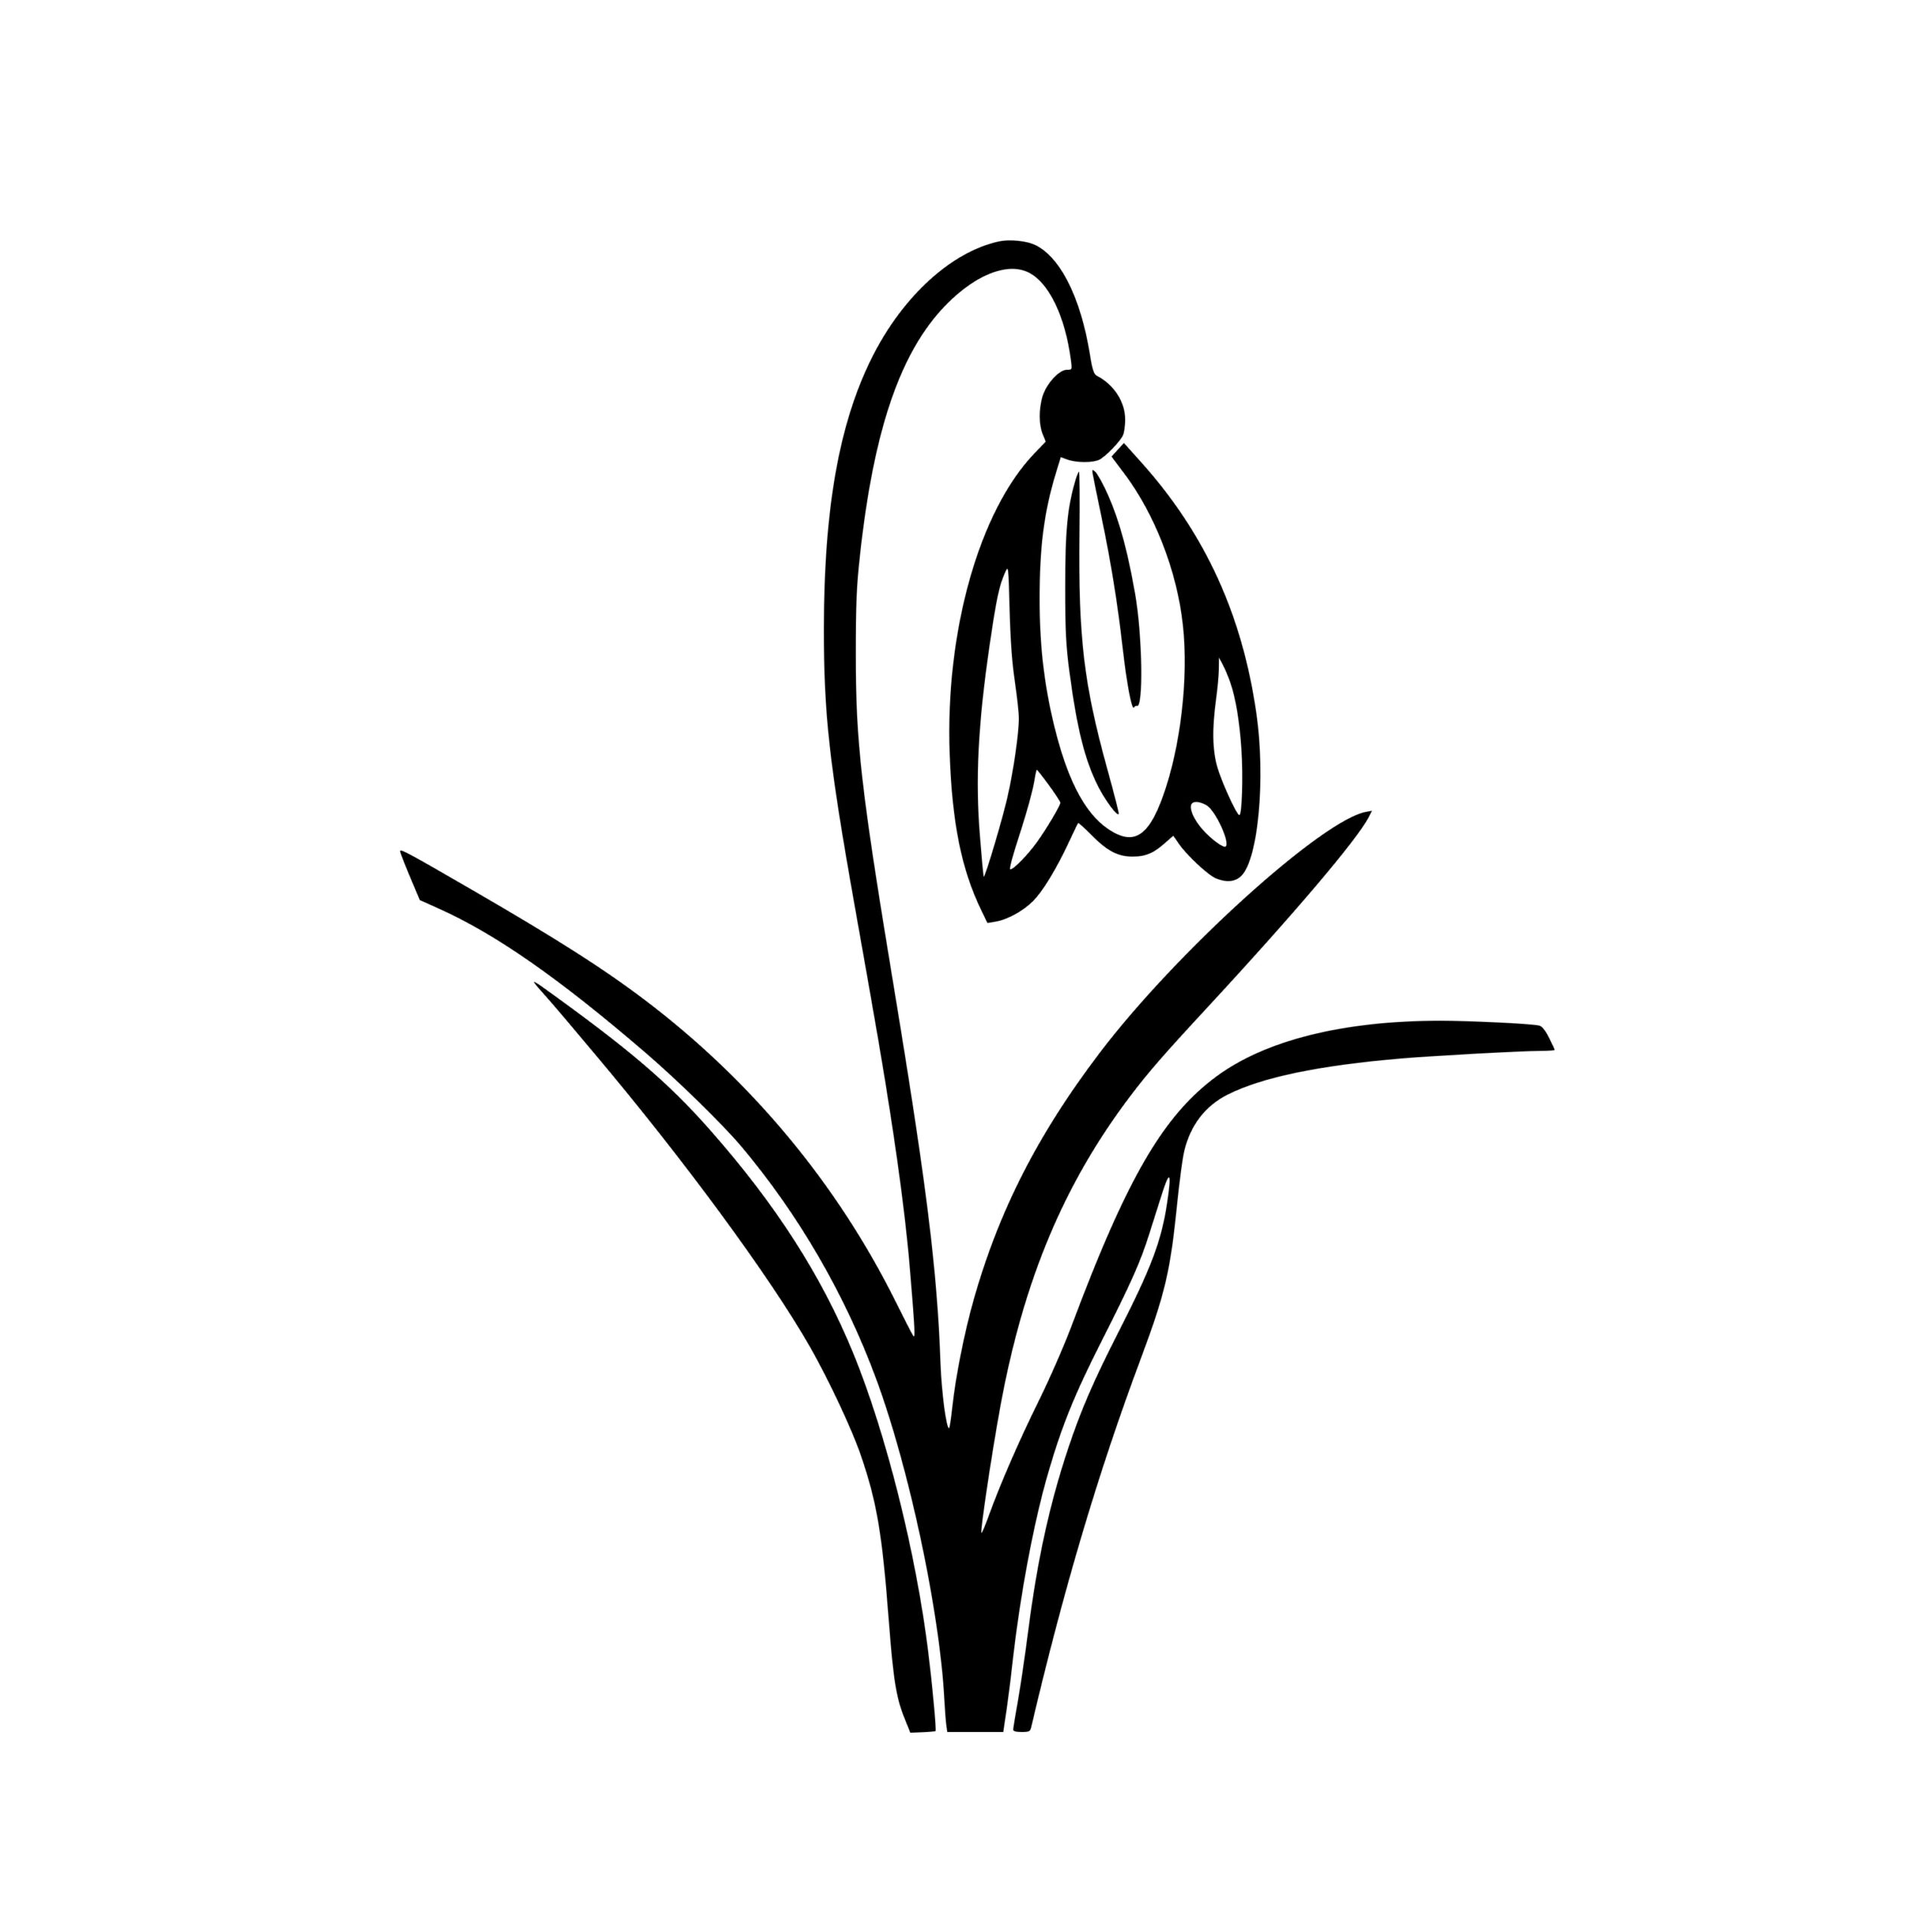 Blossoming Snowdrop: Instant SVG, PNG, DXF Files for Cricut, Silhouette ...